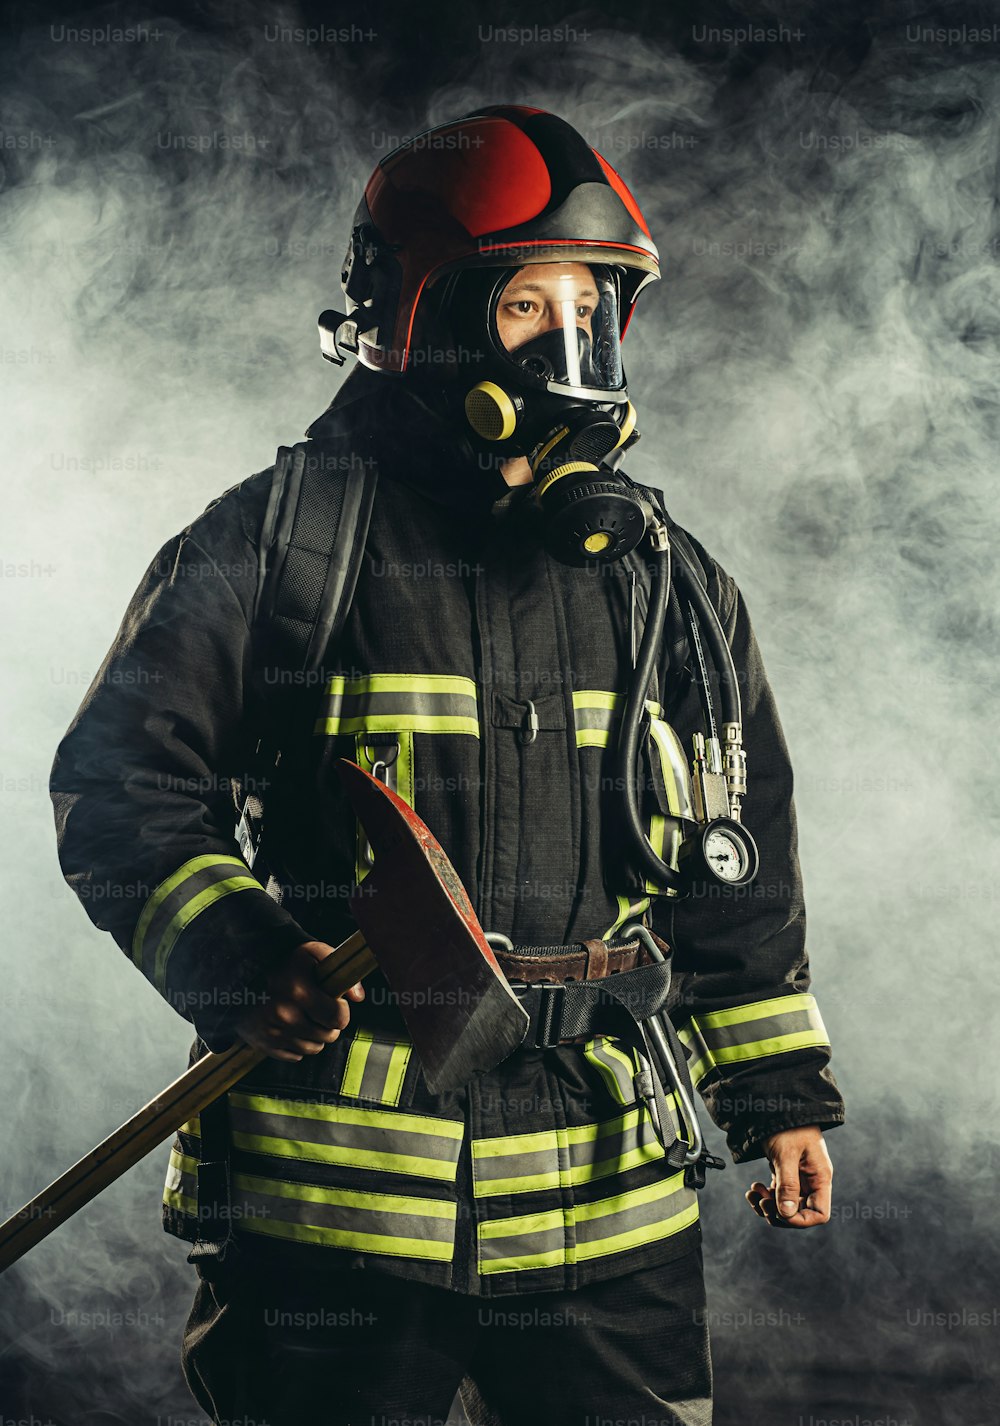 strong middle-aged fireman going to save and protect people from fire, wearing special mask or helmet, protective uniform